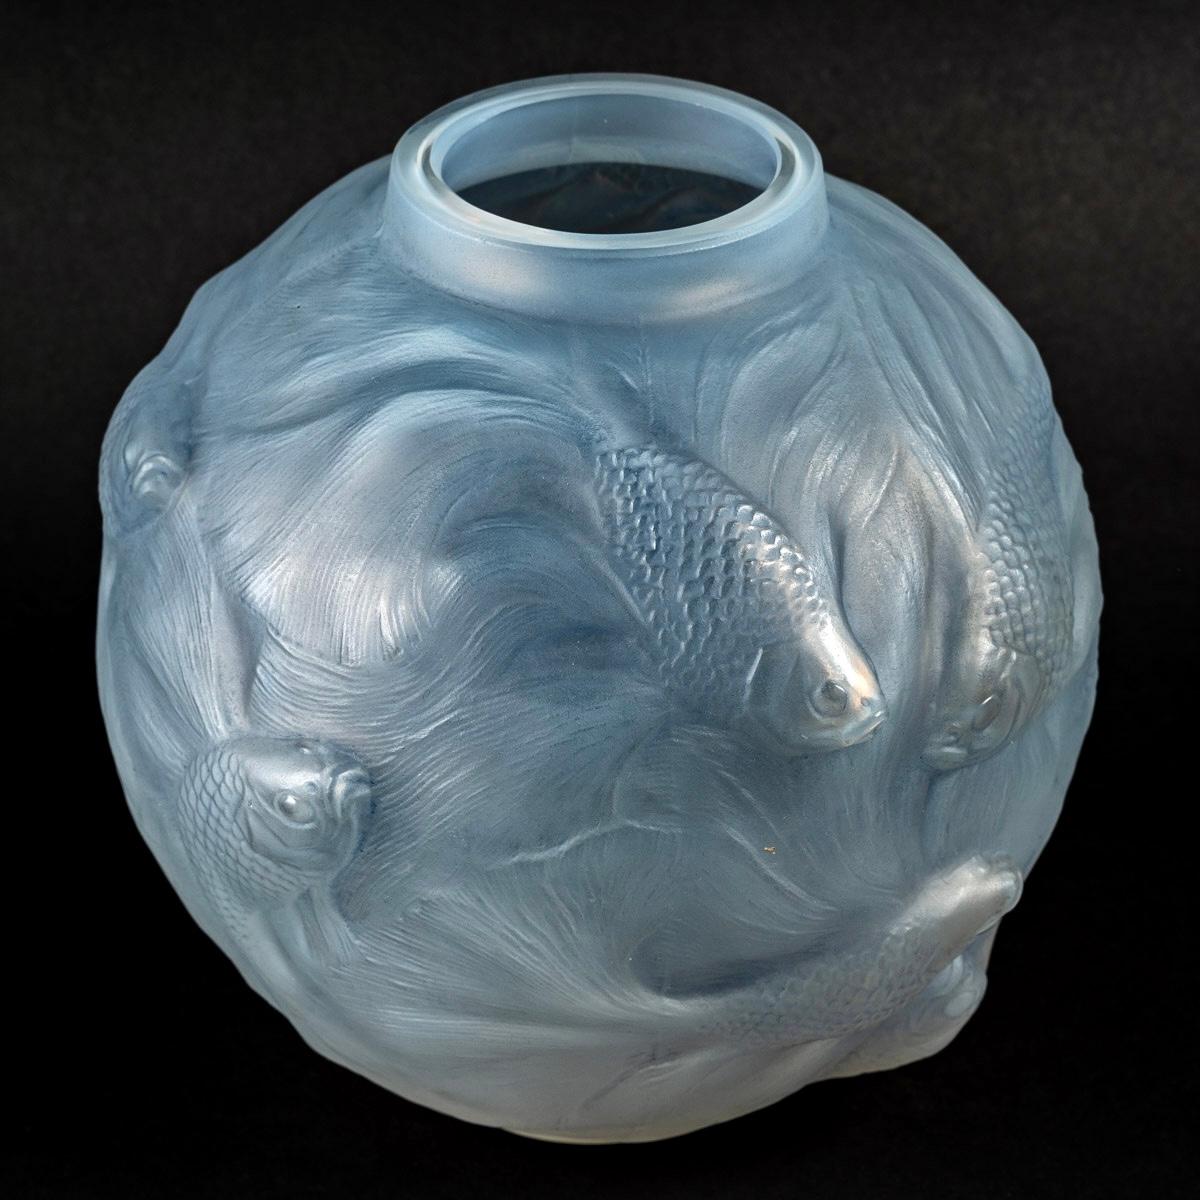 Art Deco 1924 Rene Lalique Formose Vase in Double Cased Opalescent Glass with Blue Stain